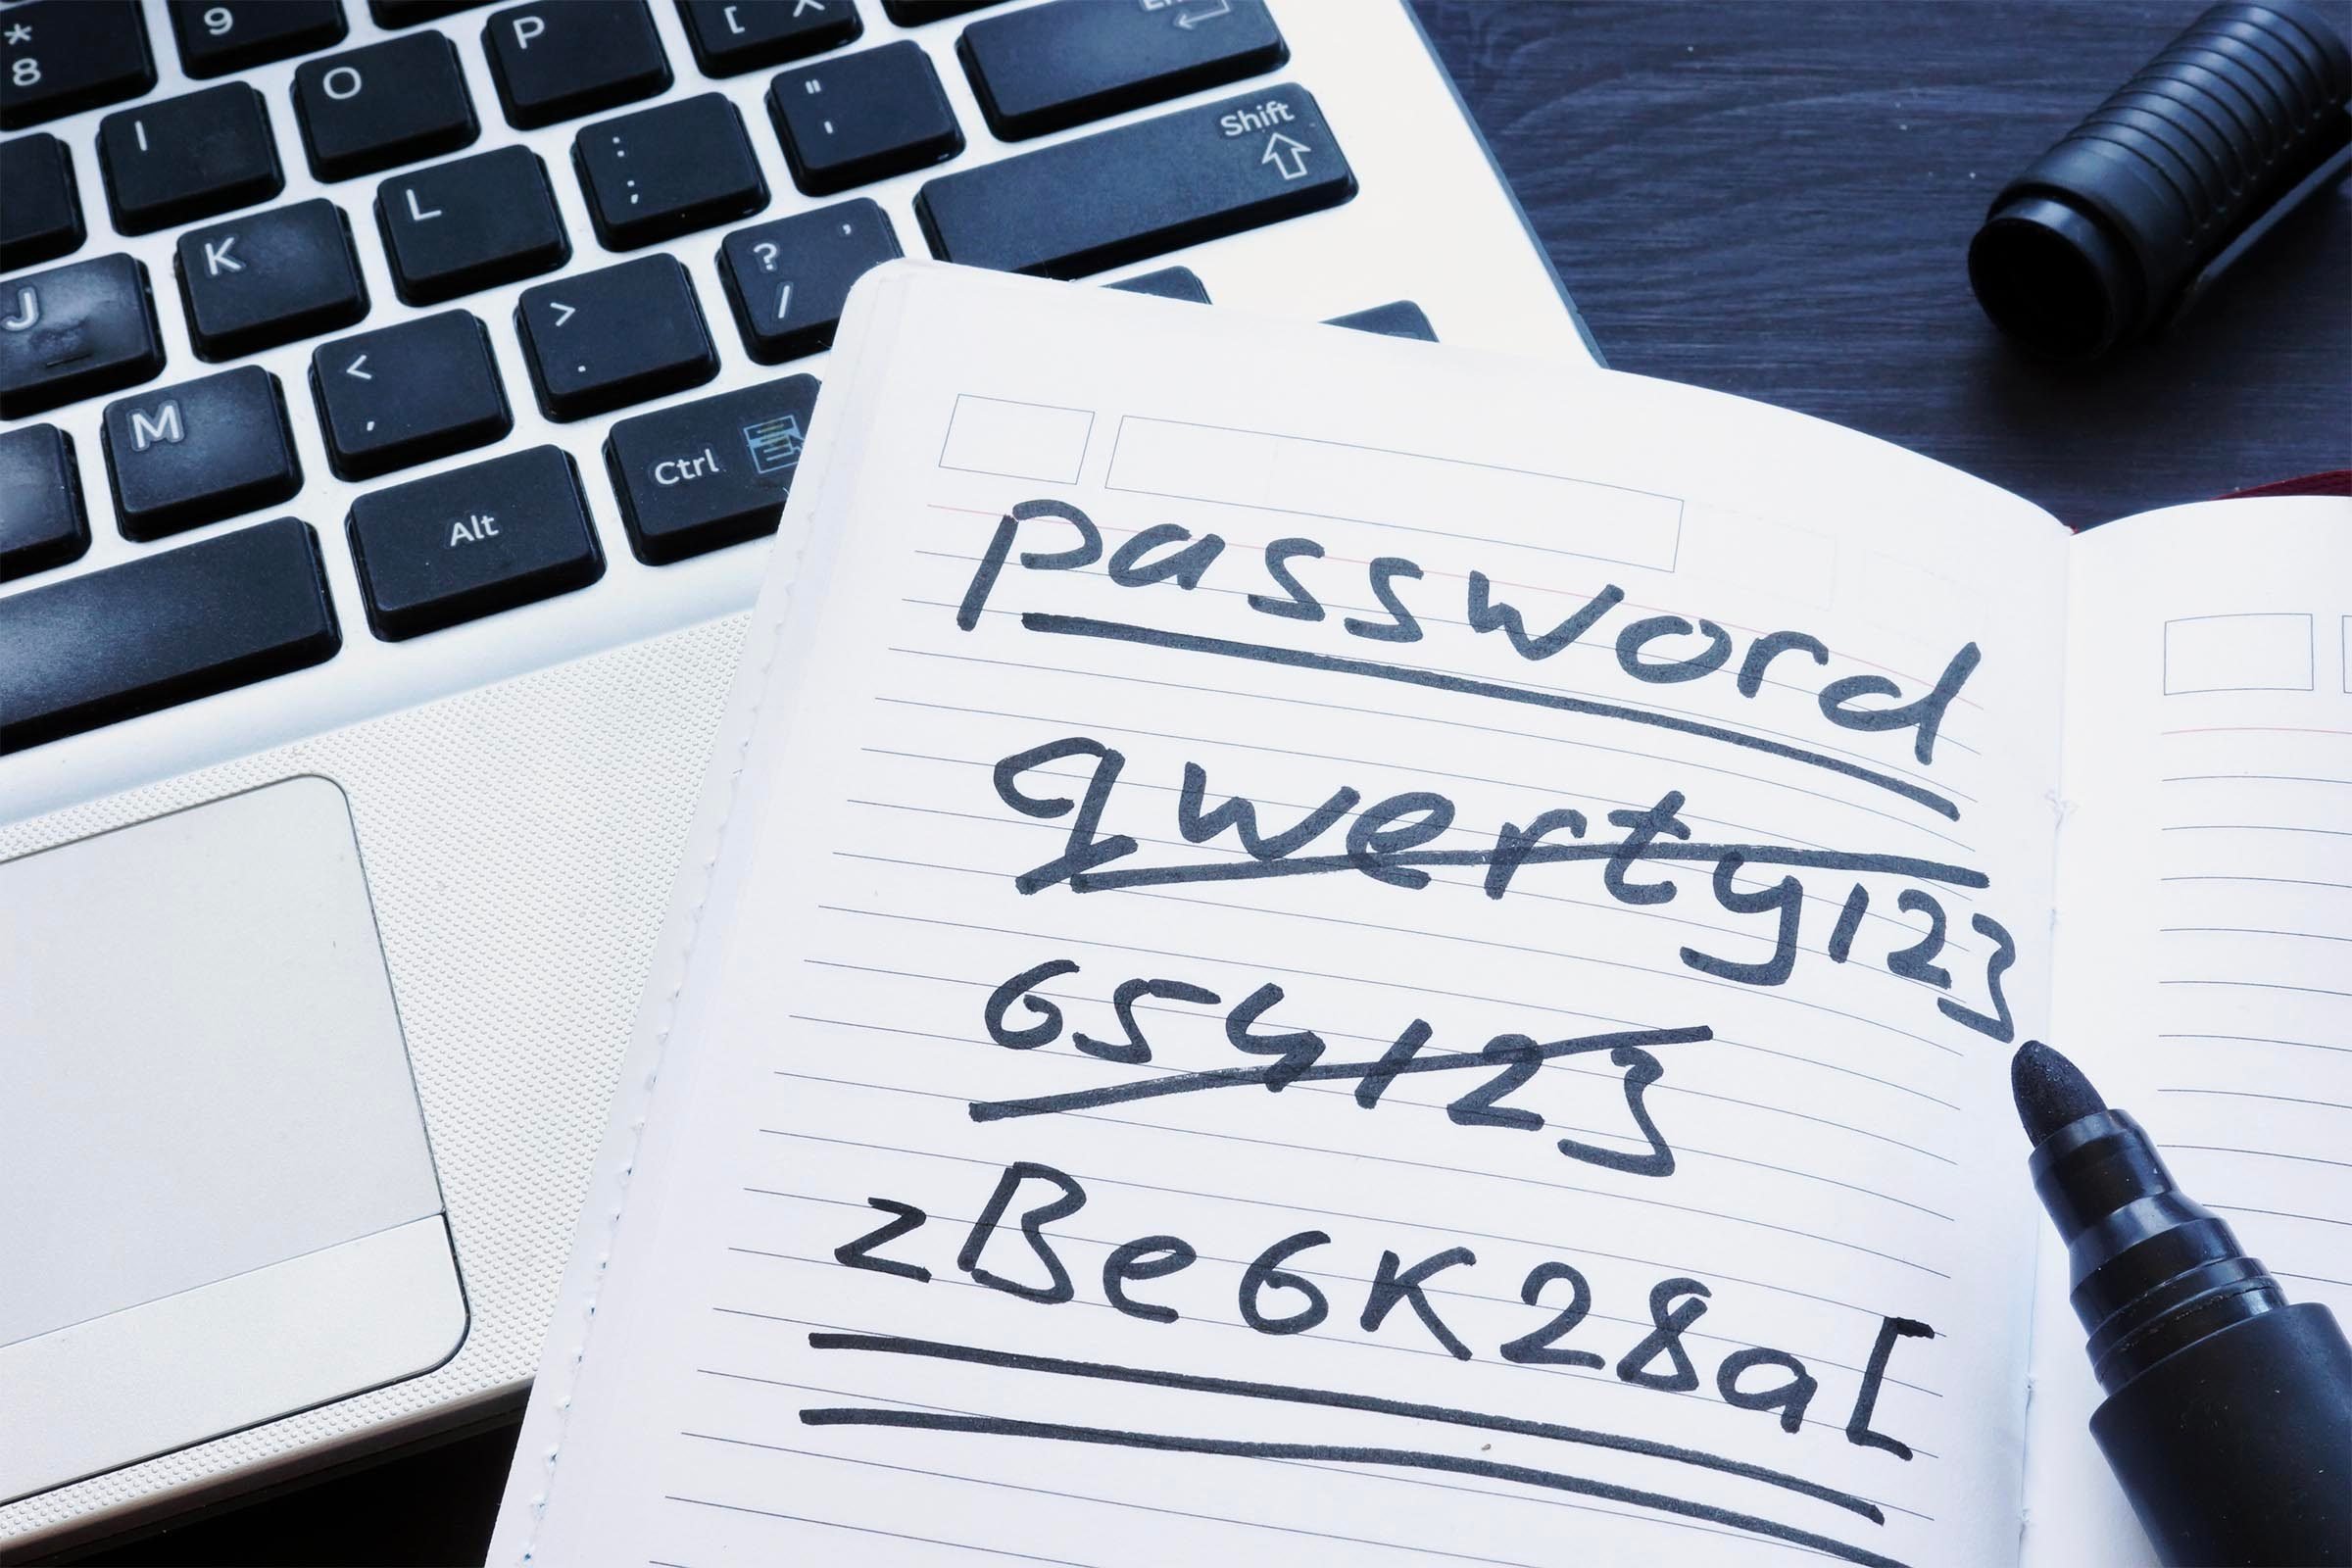 Most Common Passwords list placed on open laptop keyboard